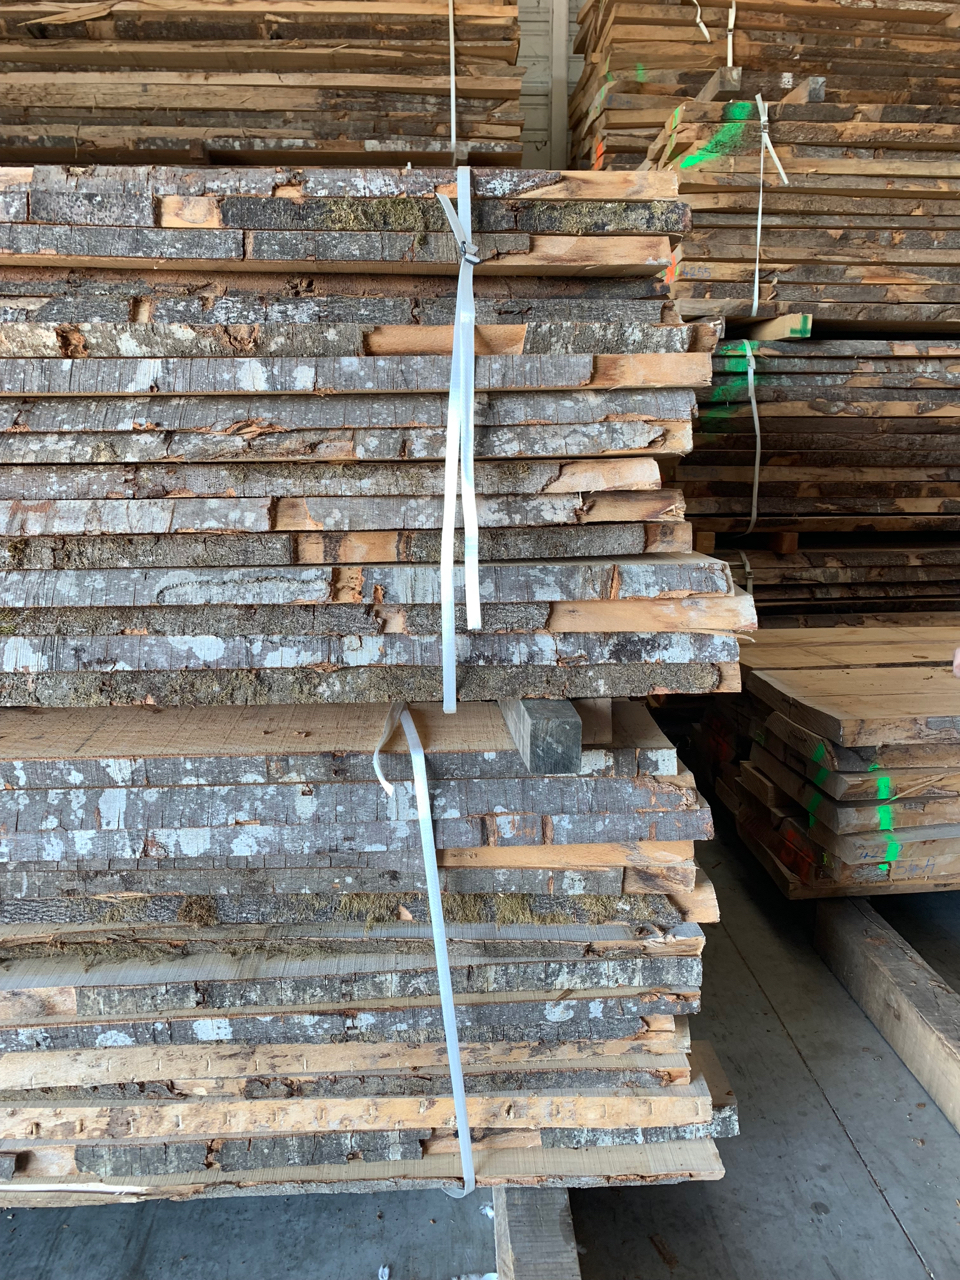 Hardwood from FSC-certified forests is left to dry for years prior to cutting.